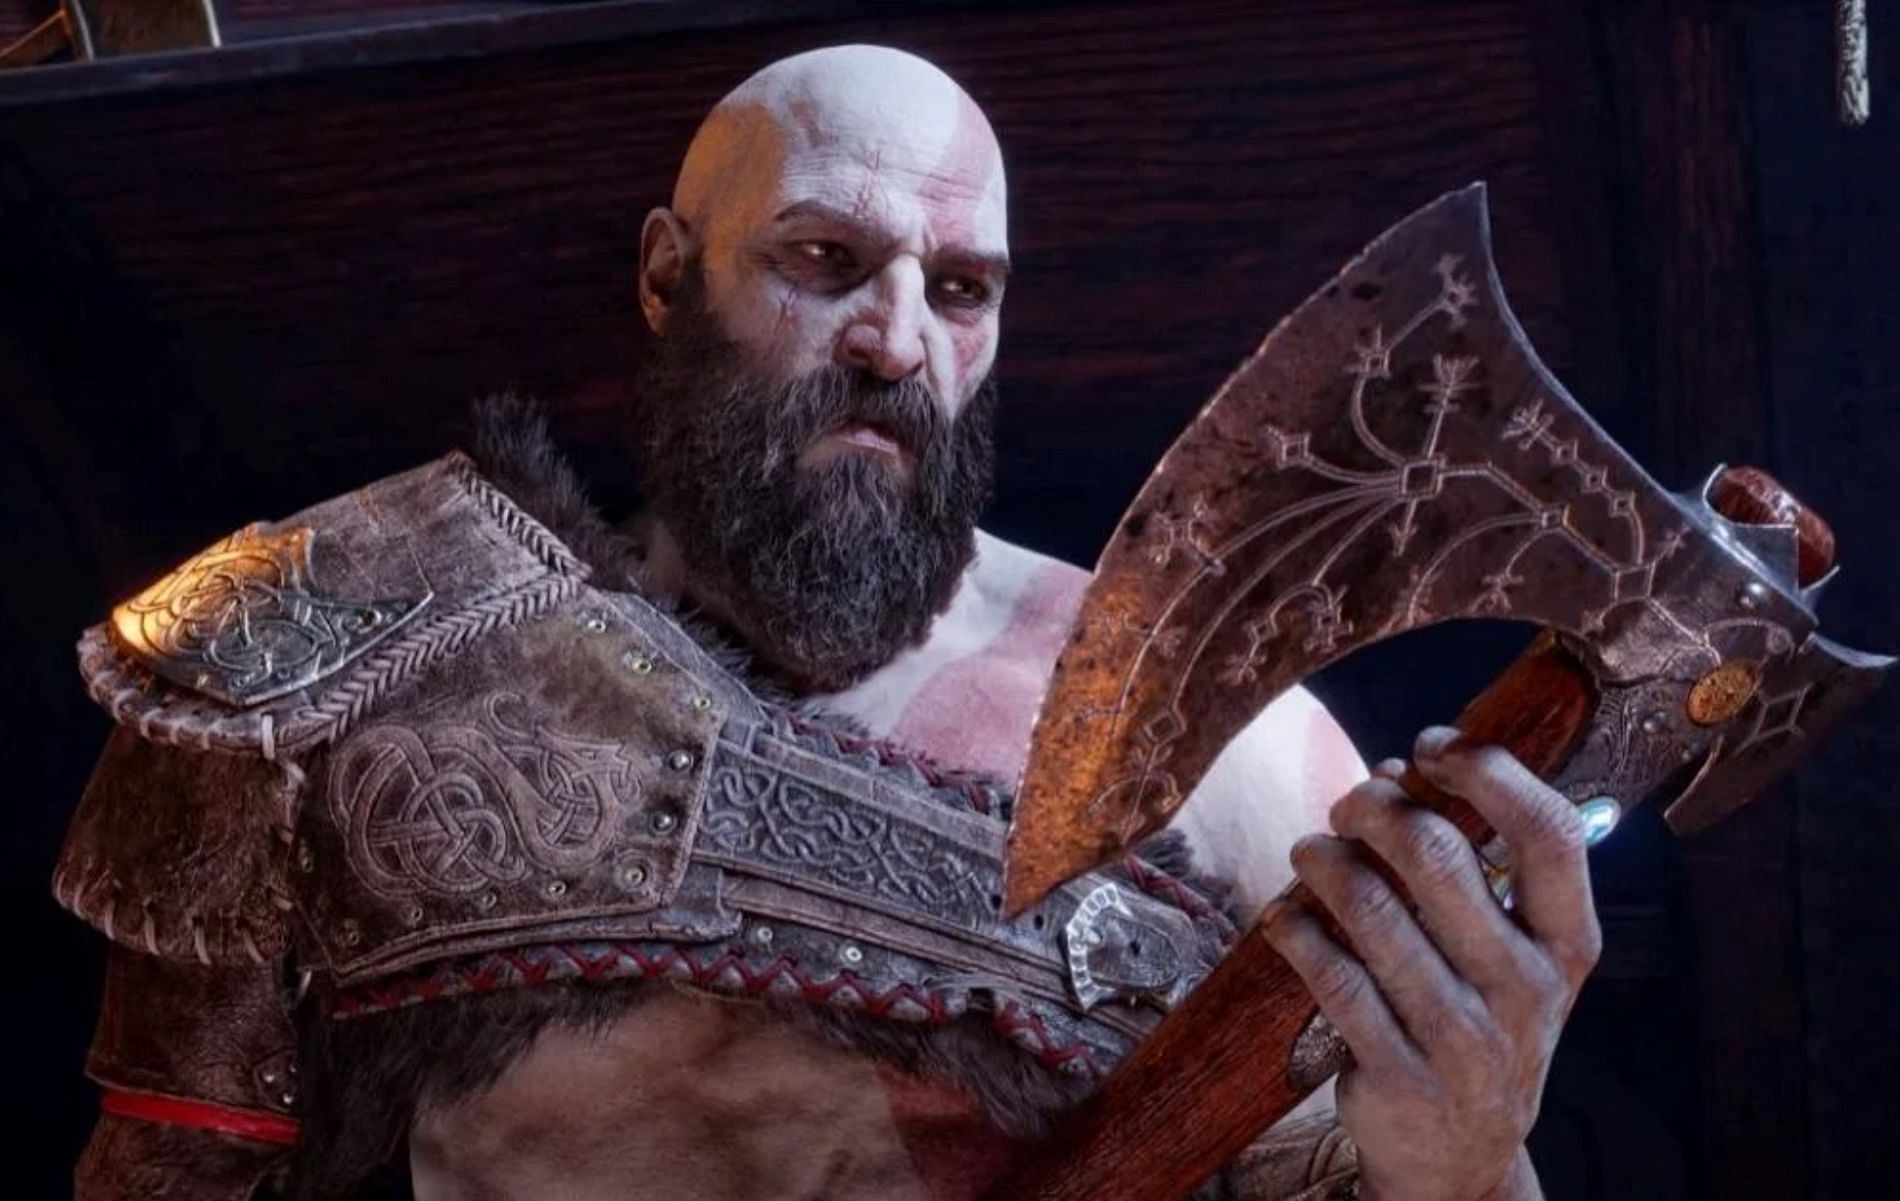 Will God of War Ragnarok come to PC? Possible release and more explained